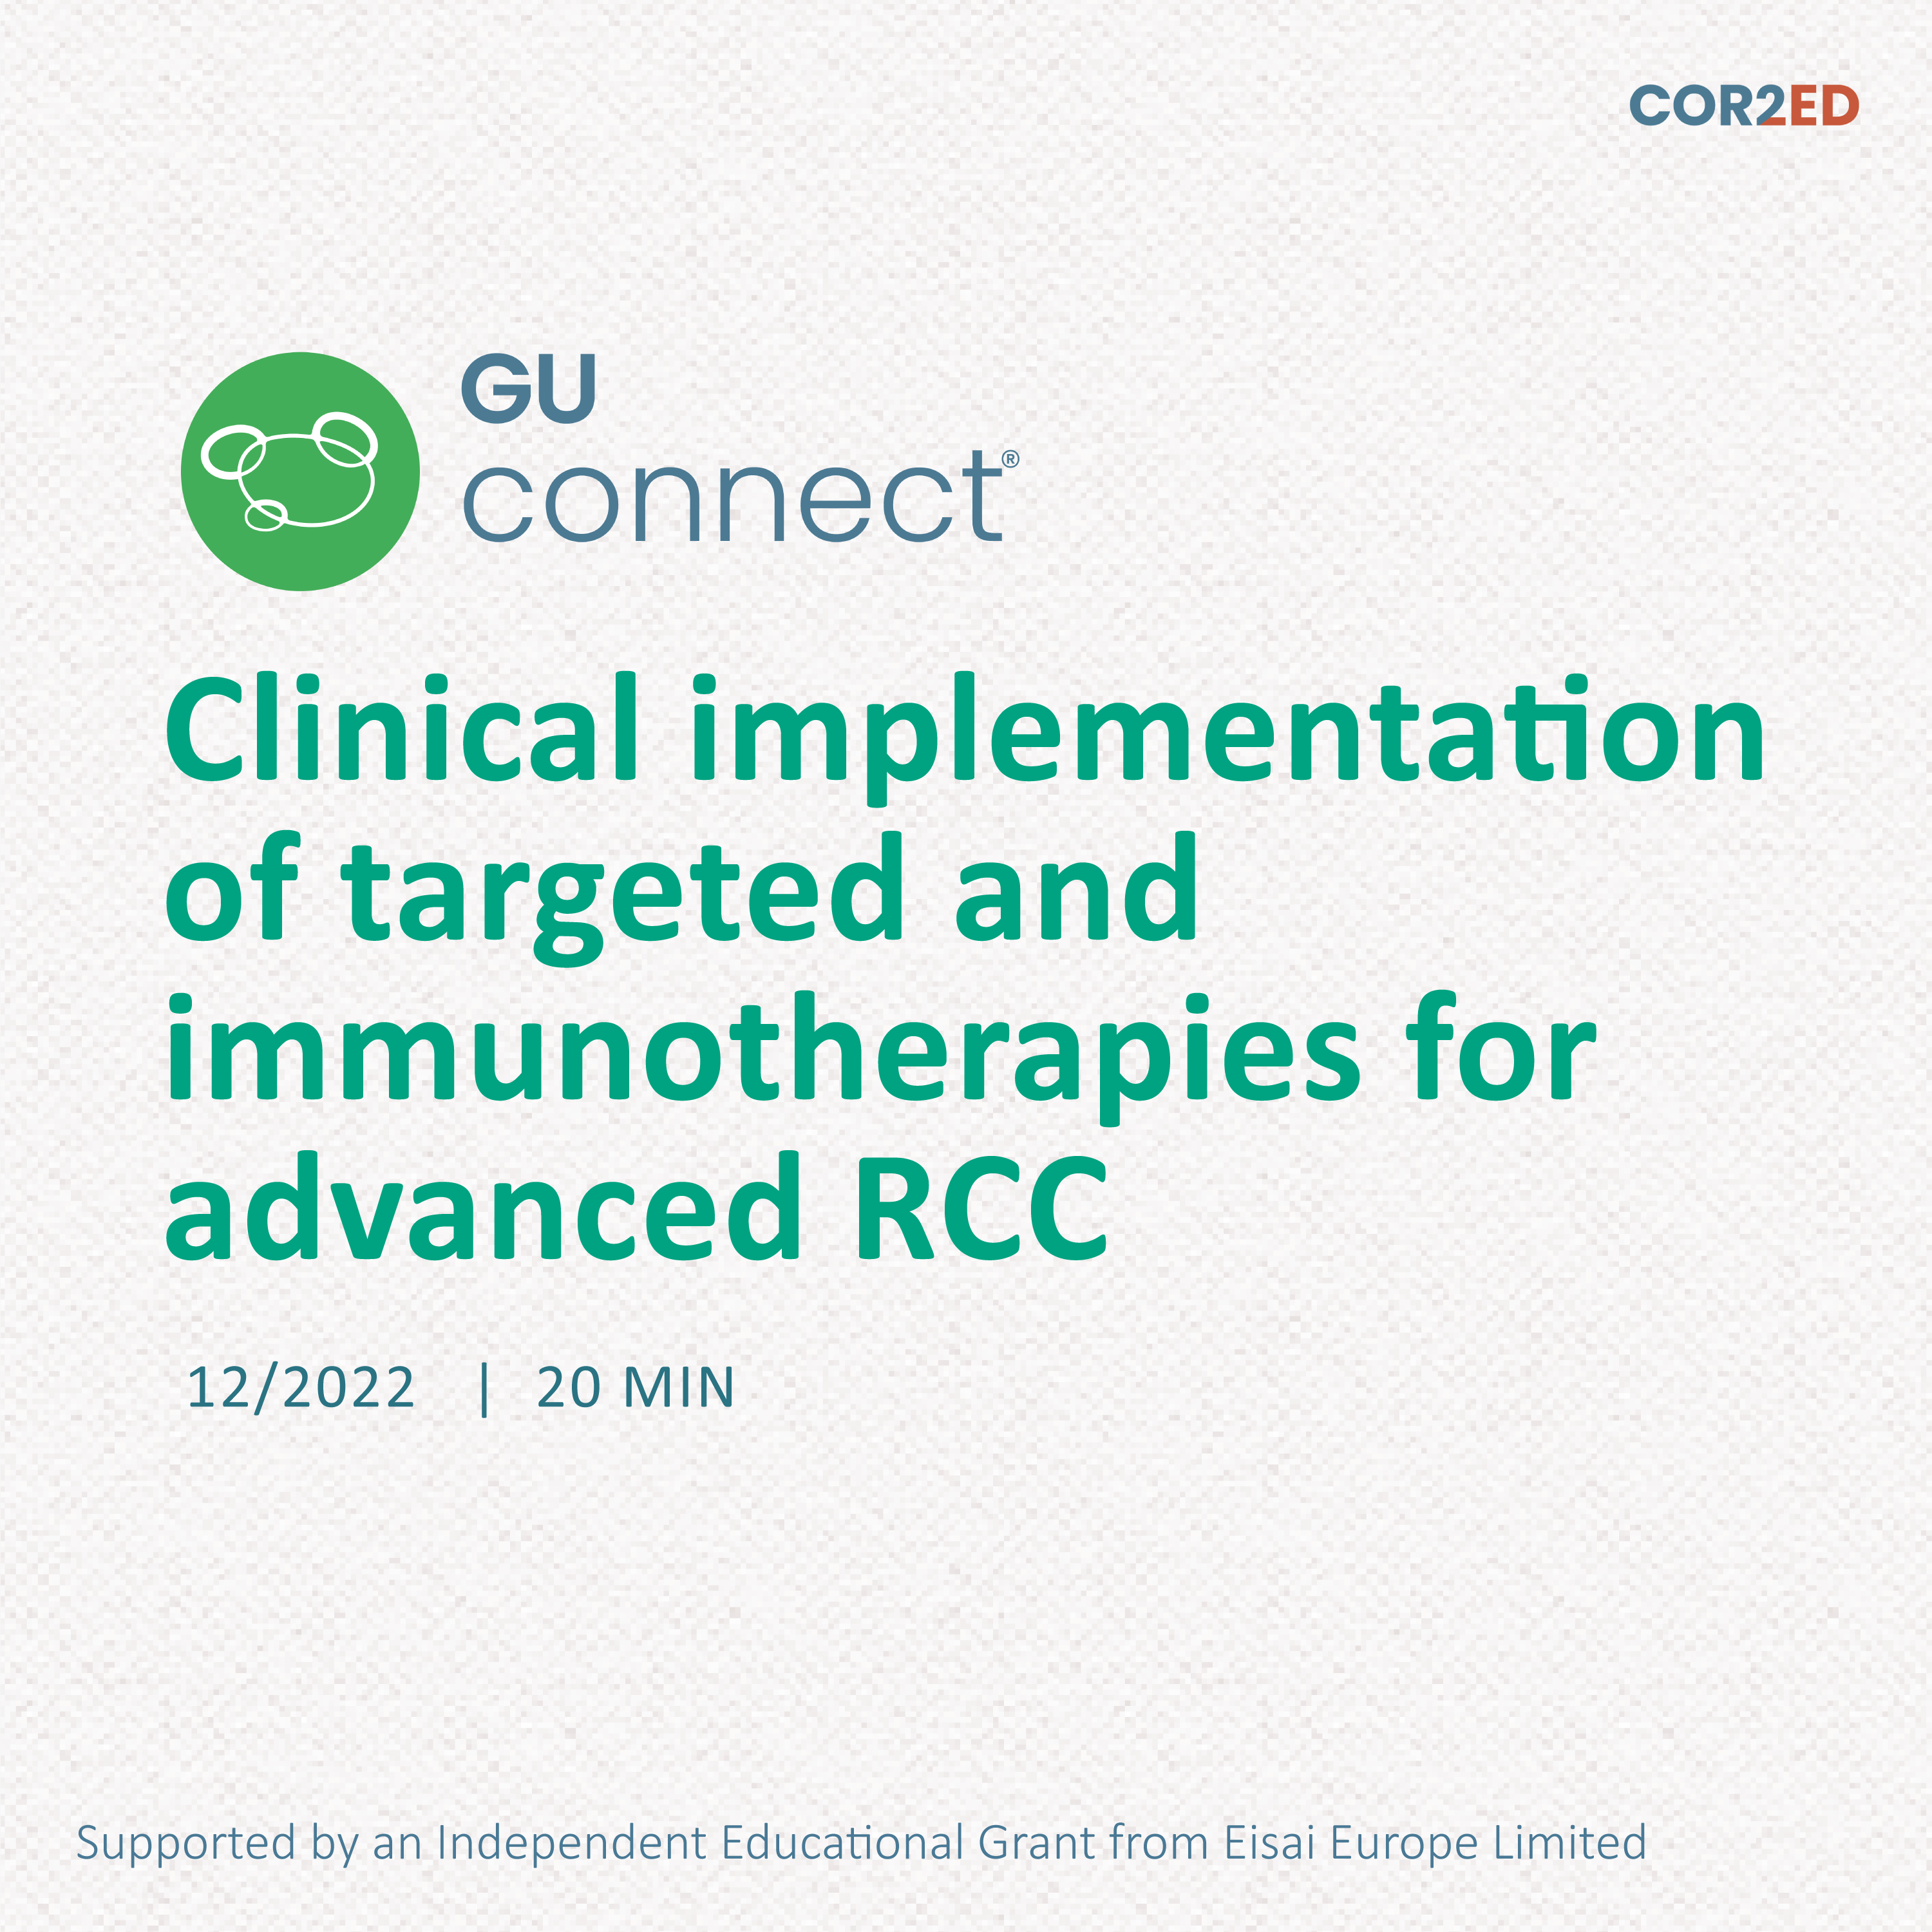 Clinical implementation of targeted and immunotherapies for advanced RCC